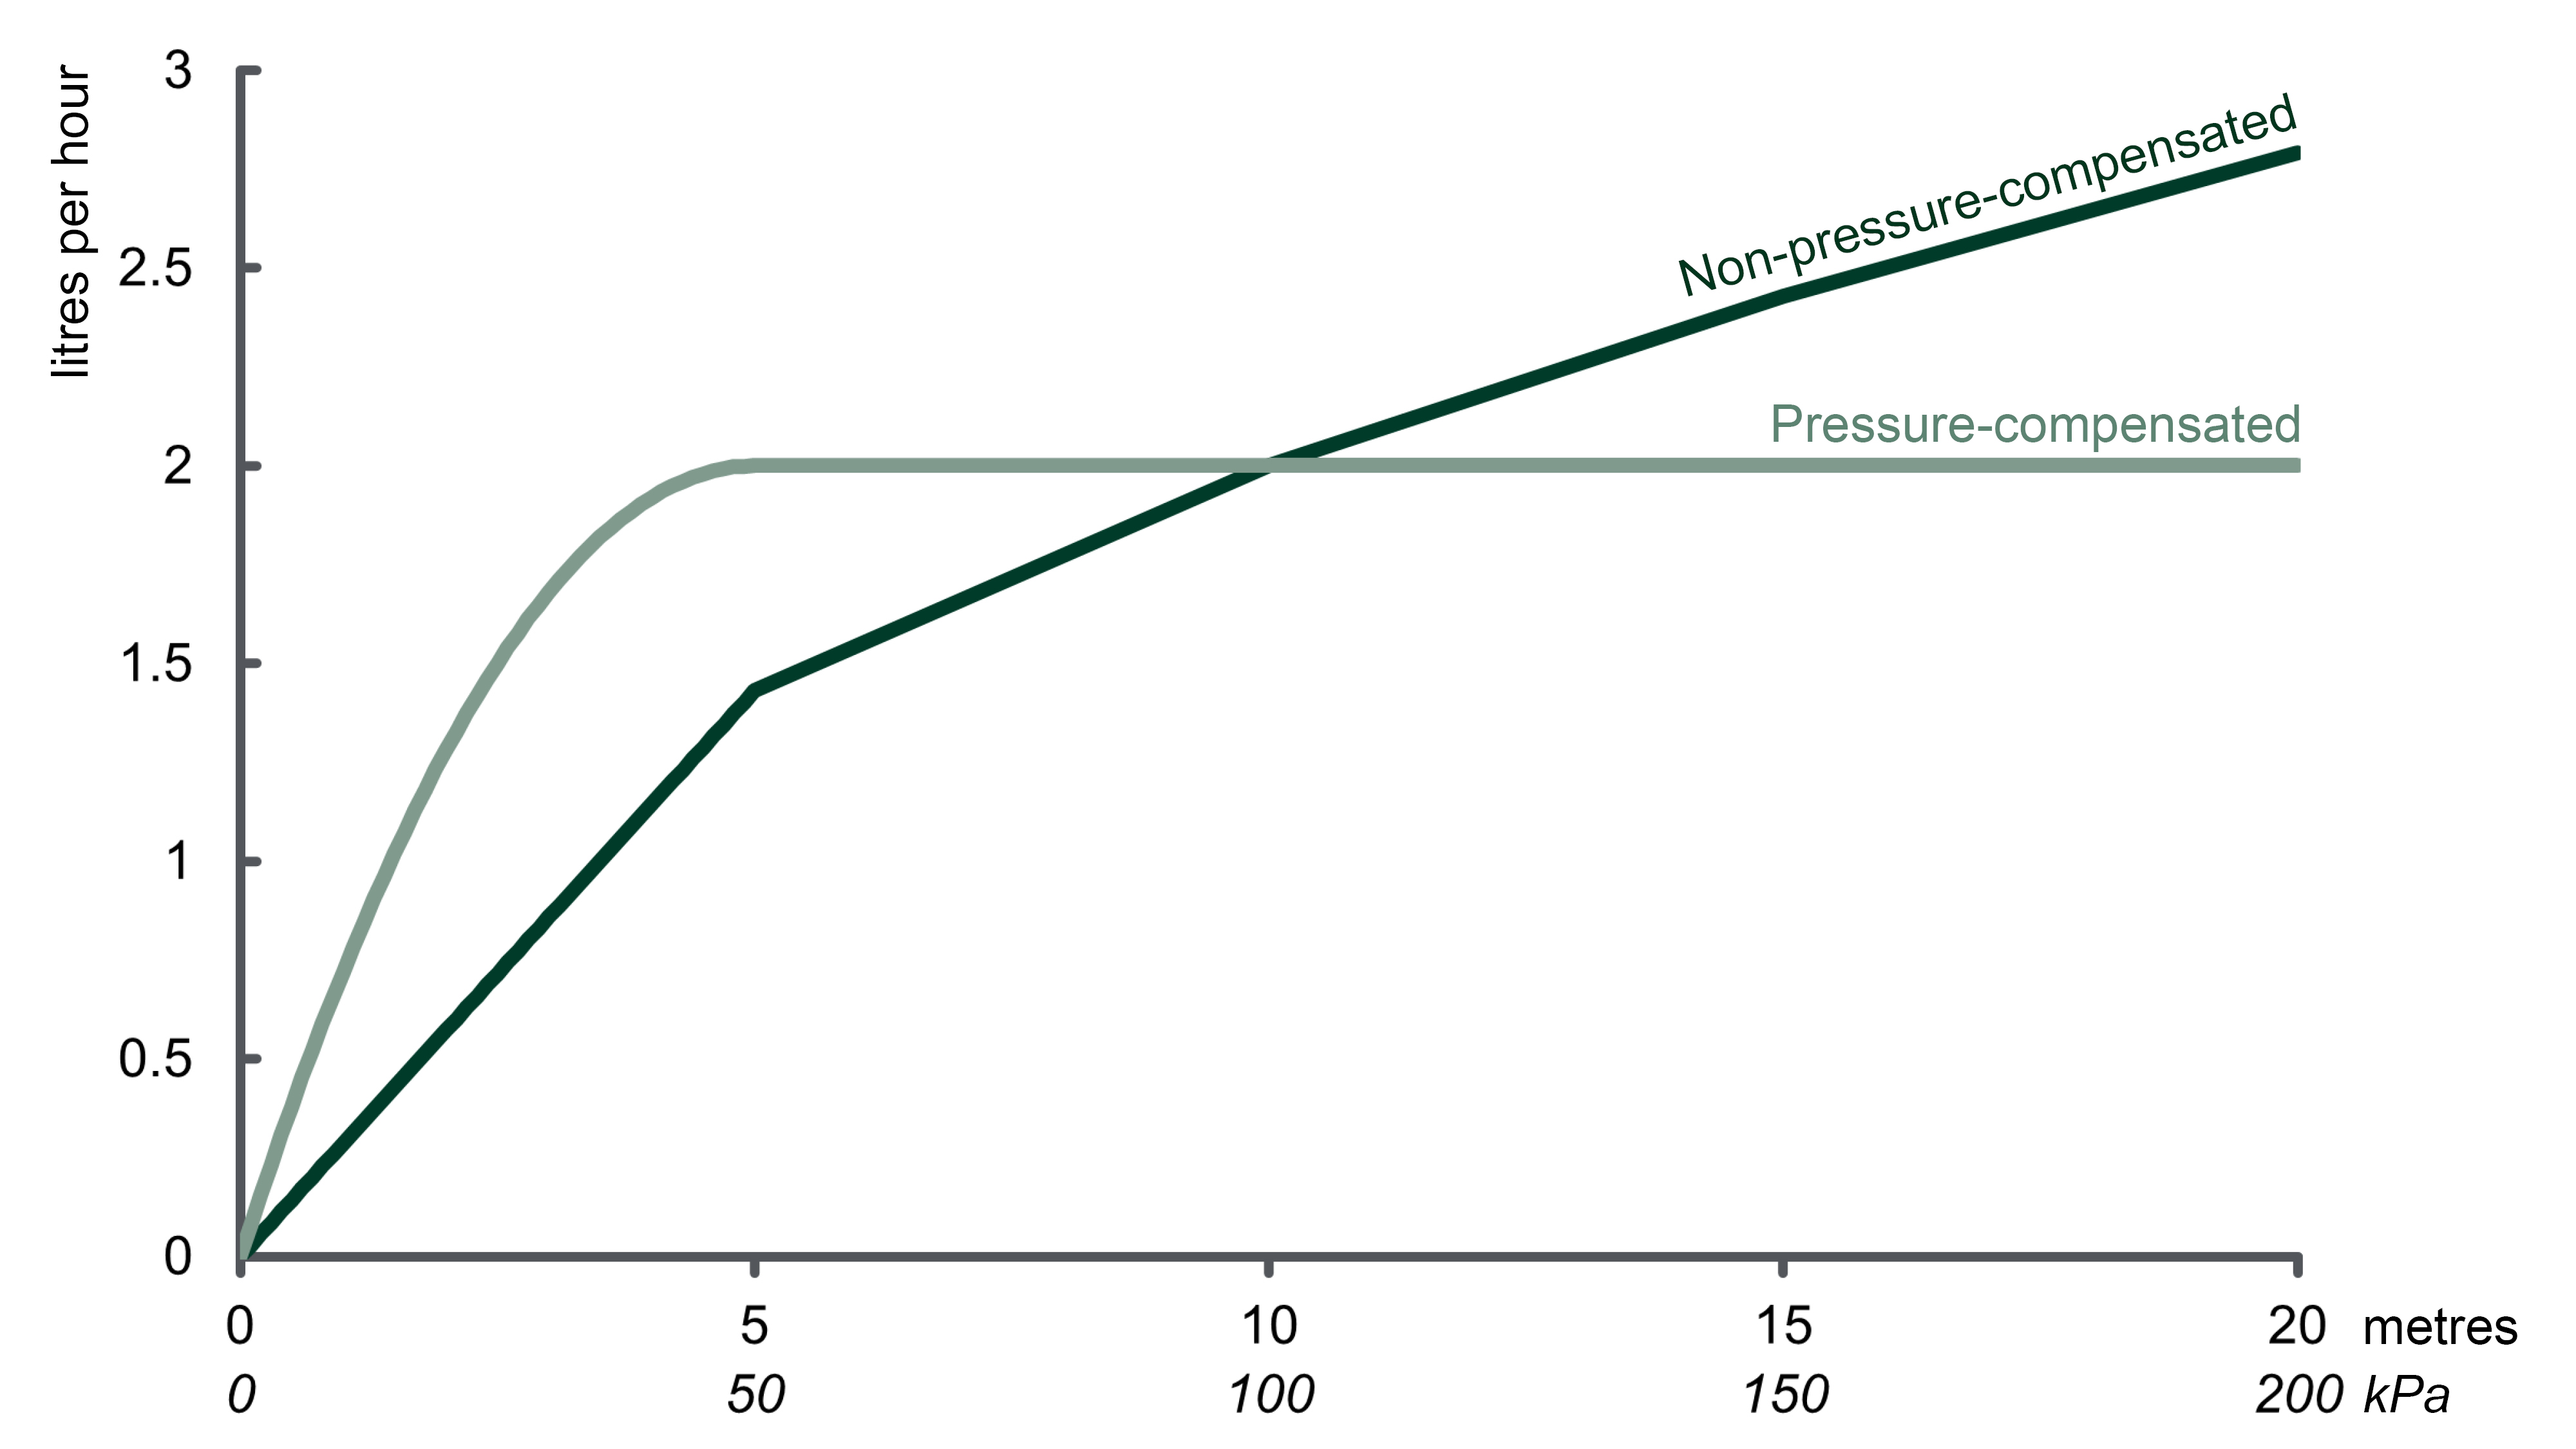 Image of a graph showing discharge versus pressure of 2 L/hr pressure compensated and non-pressure compensated drippers.